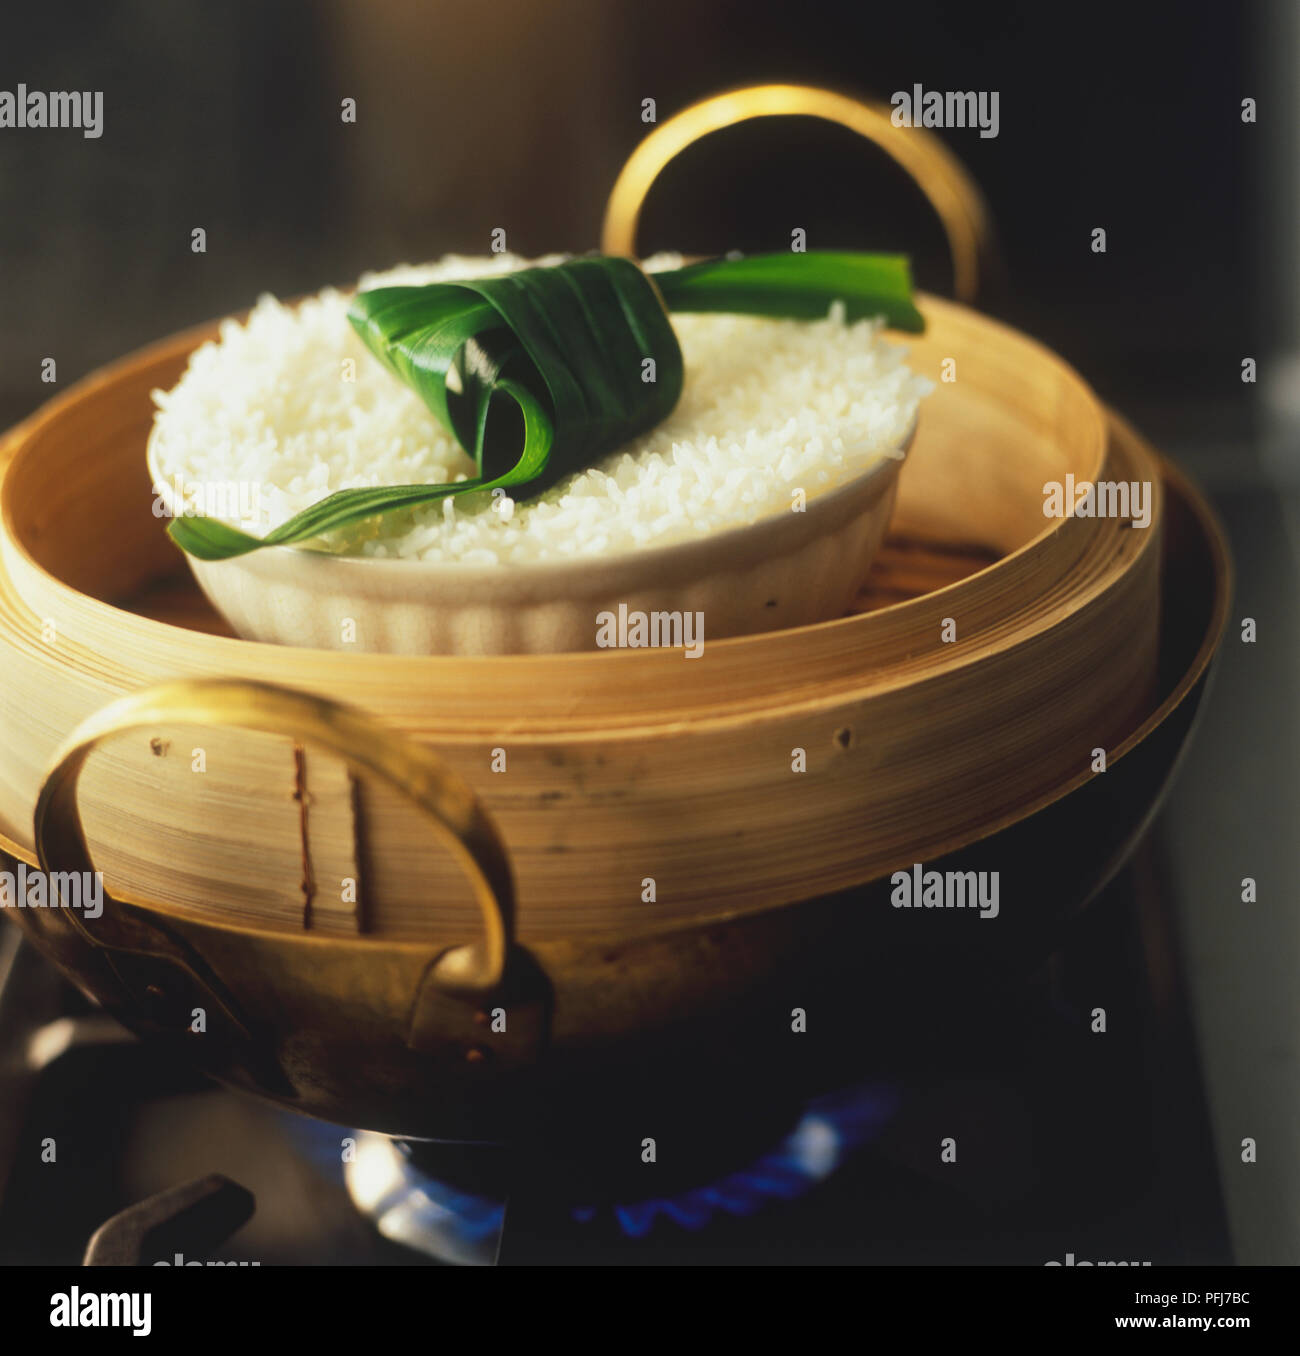 Kao suay, bowl of steam-cooked white jasmine rice, garnished with a folded pandanus leaf, on a gas stove Stock Photo